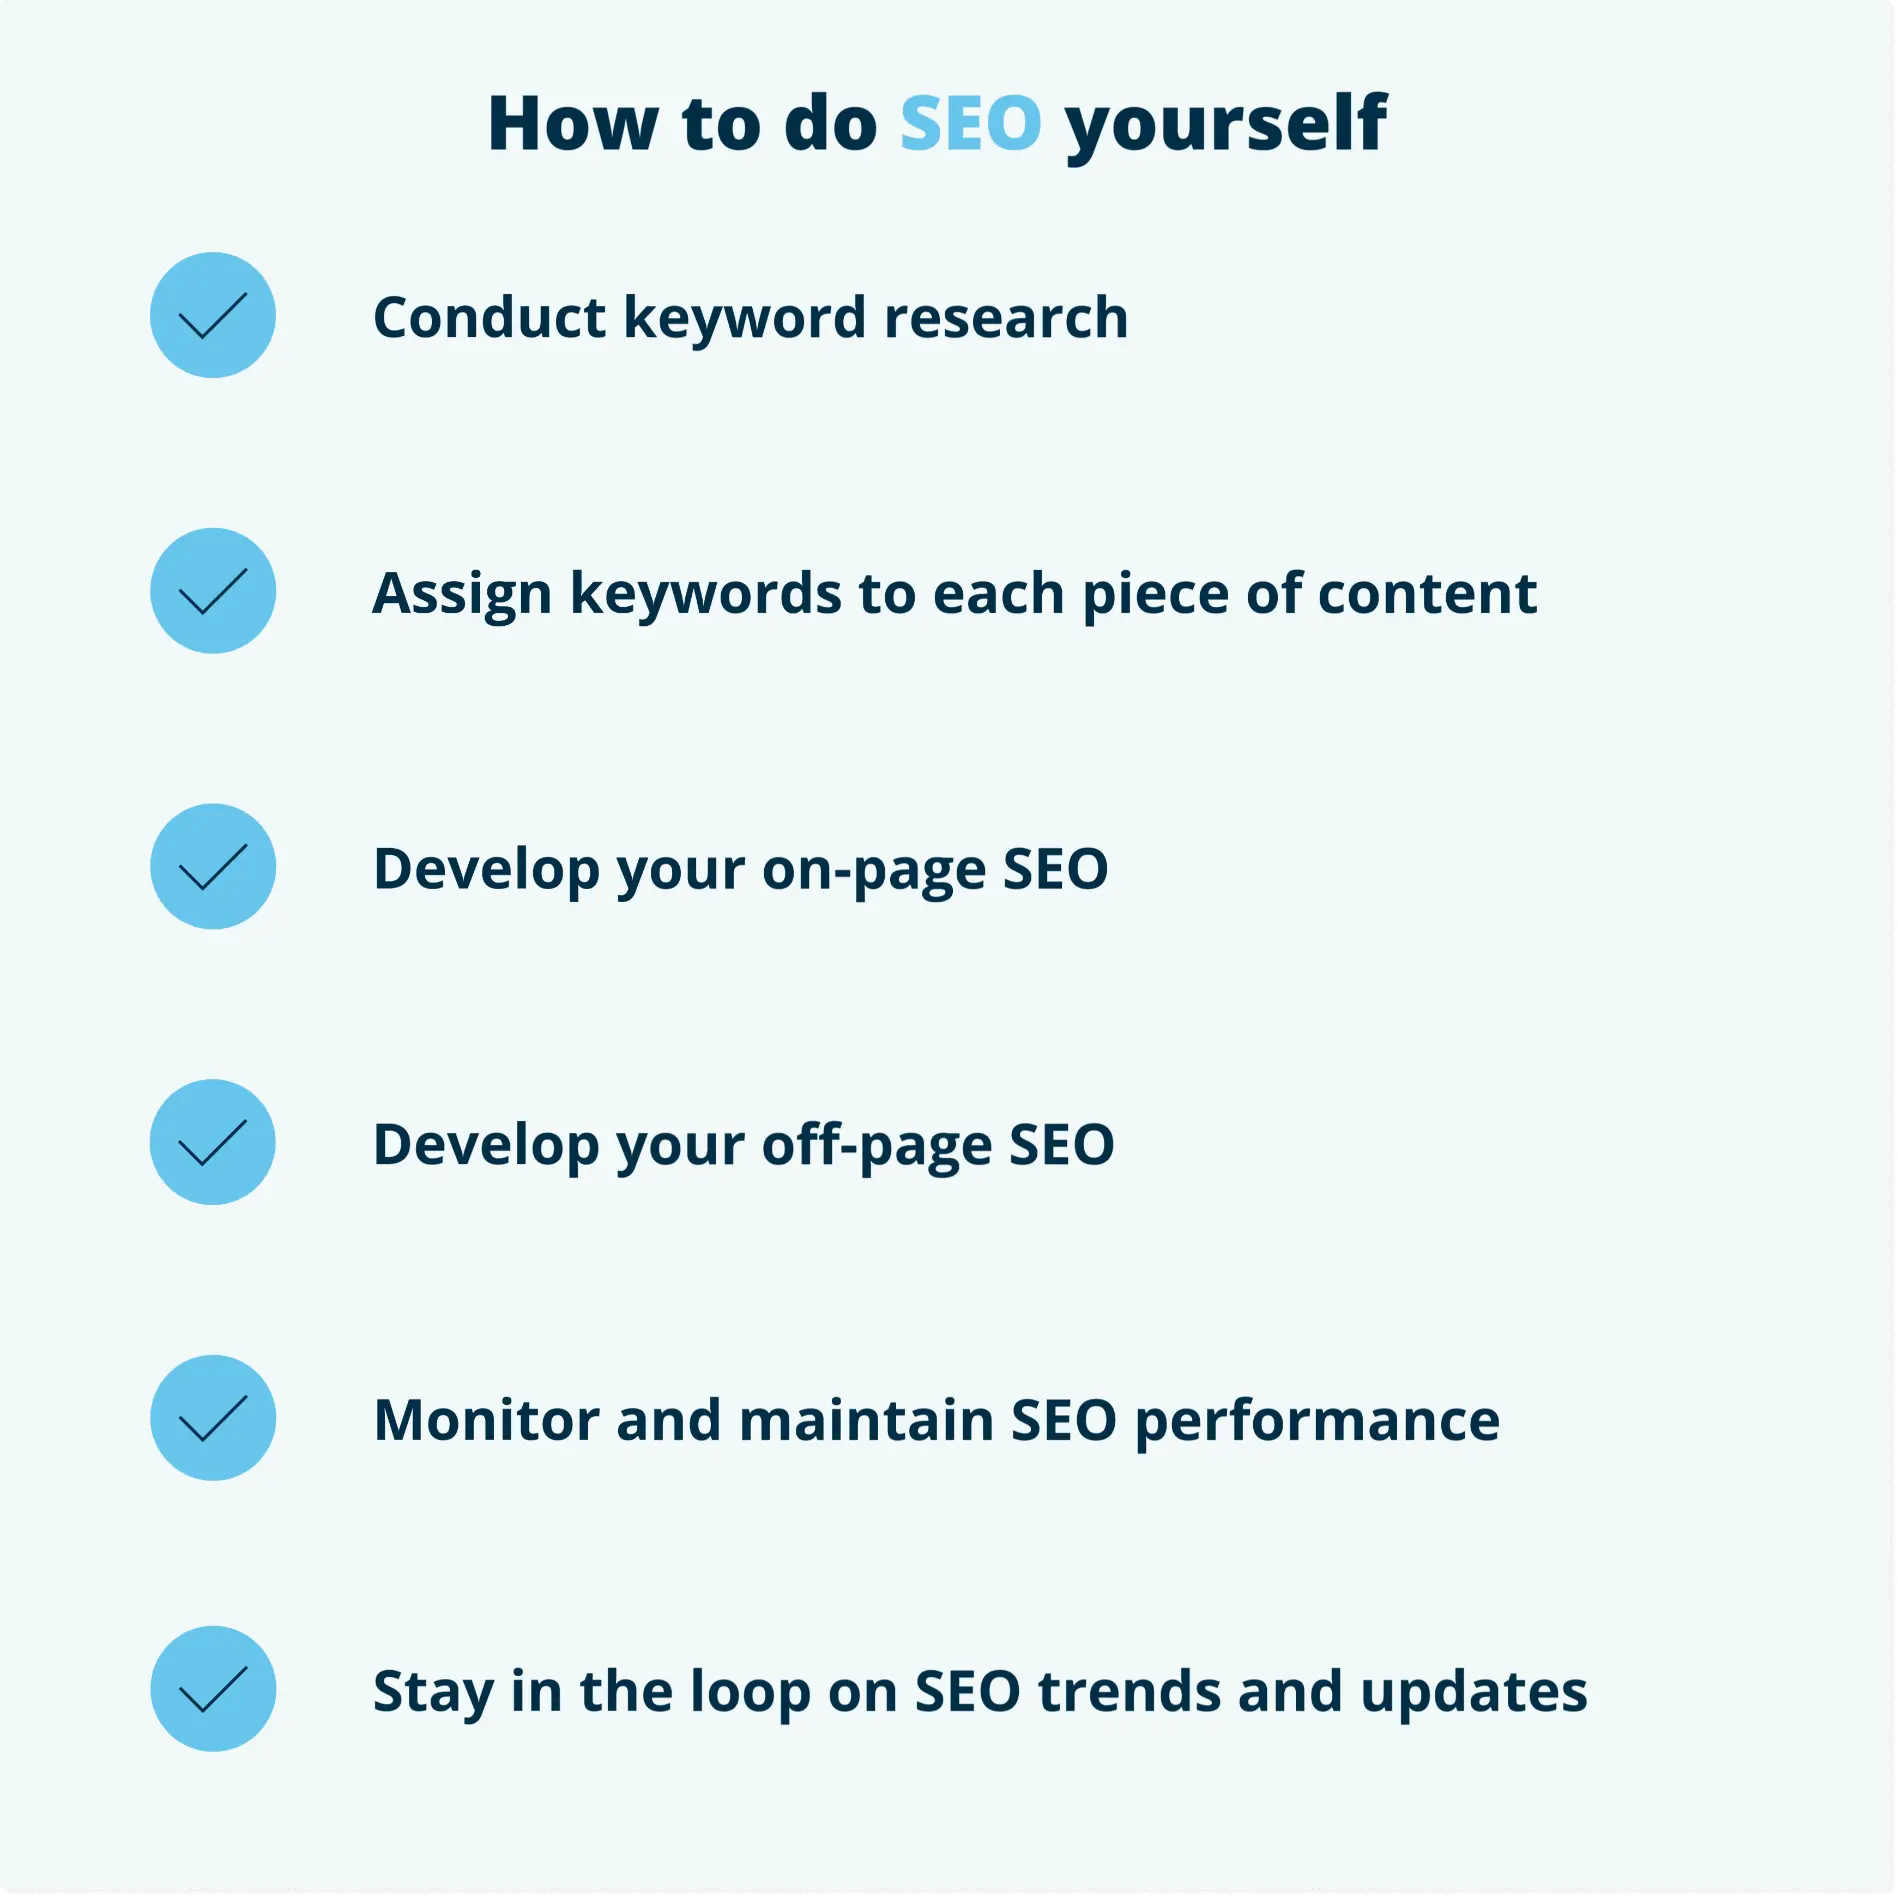 SEO by yourself